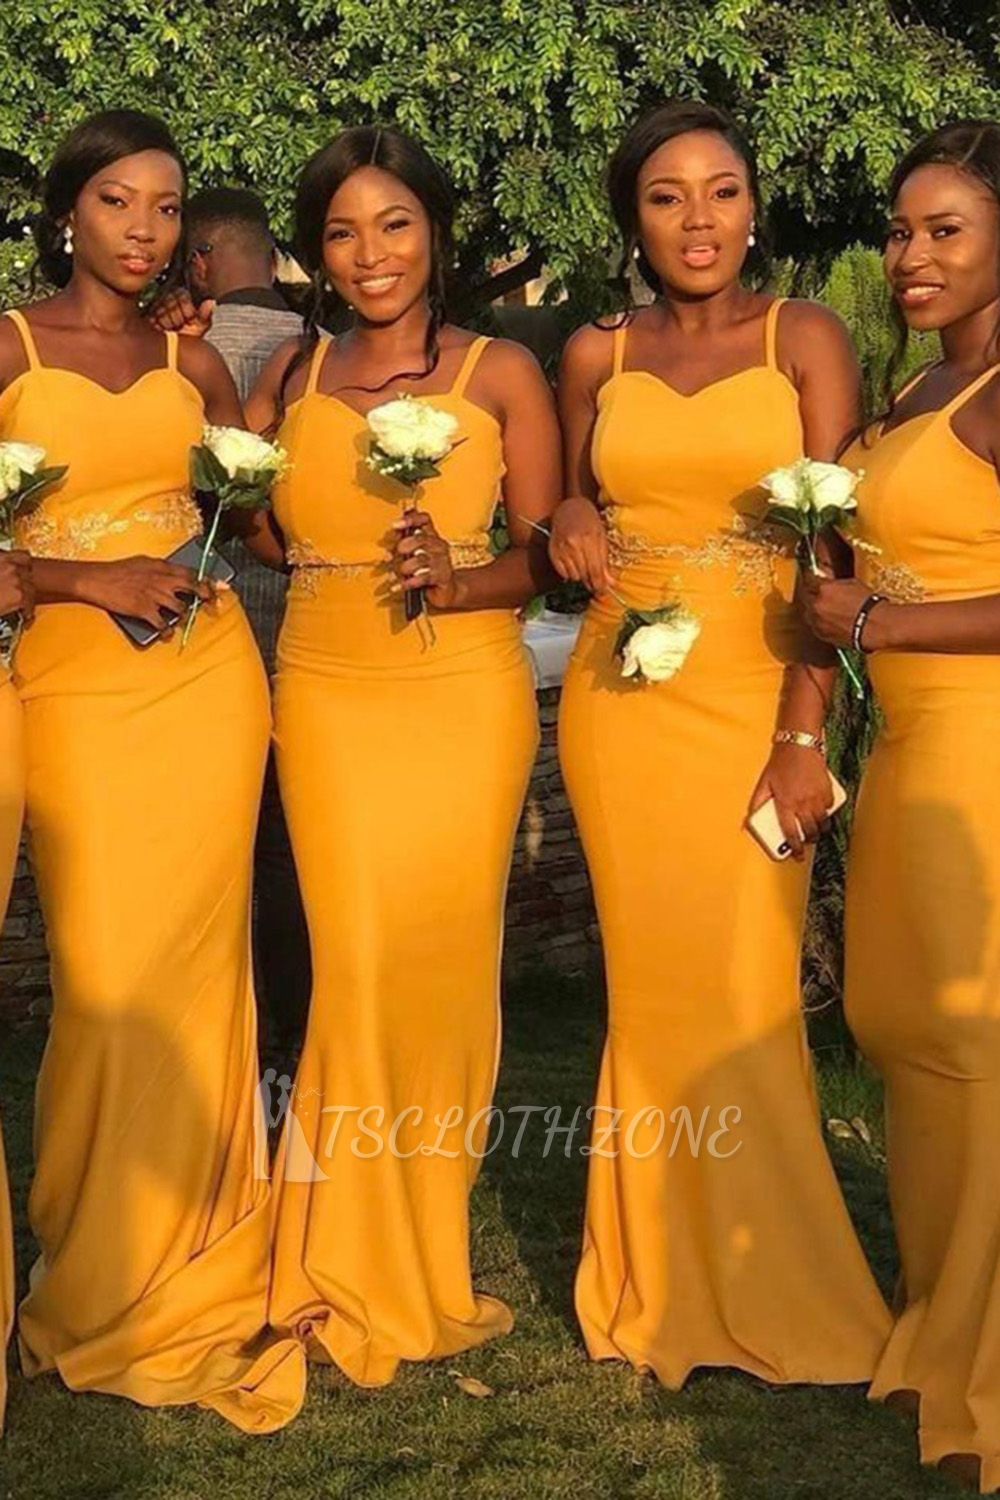 Sheath Sweetheart Neckline Spaghetti Yellow Lace Appliqued Bridesmaid Dresses | Affordable Long Court Train Wedding Party Dresses